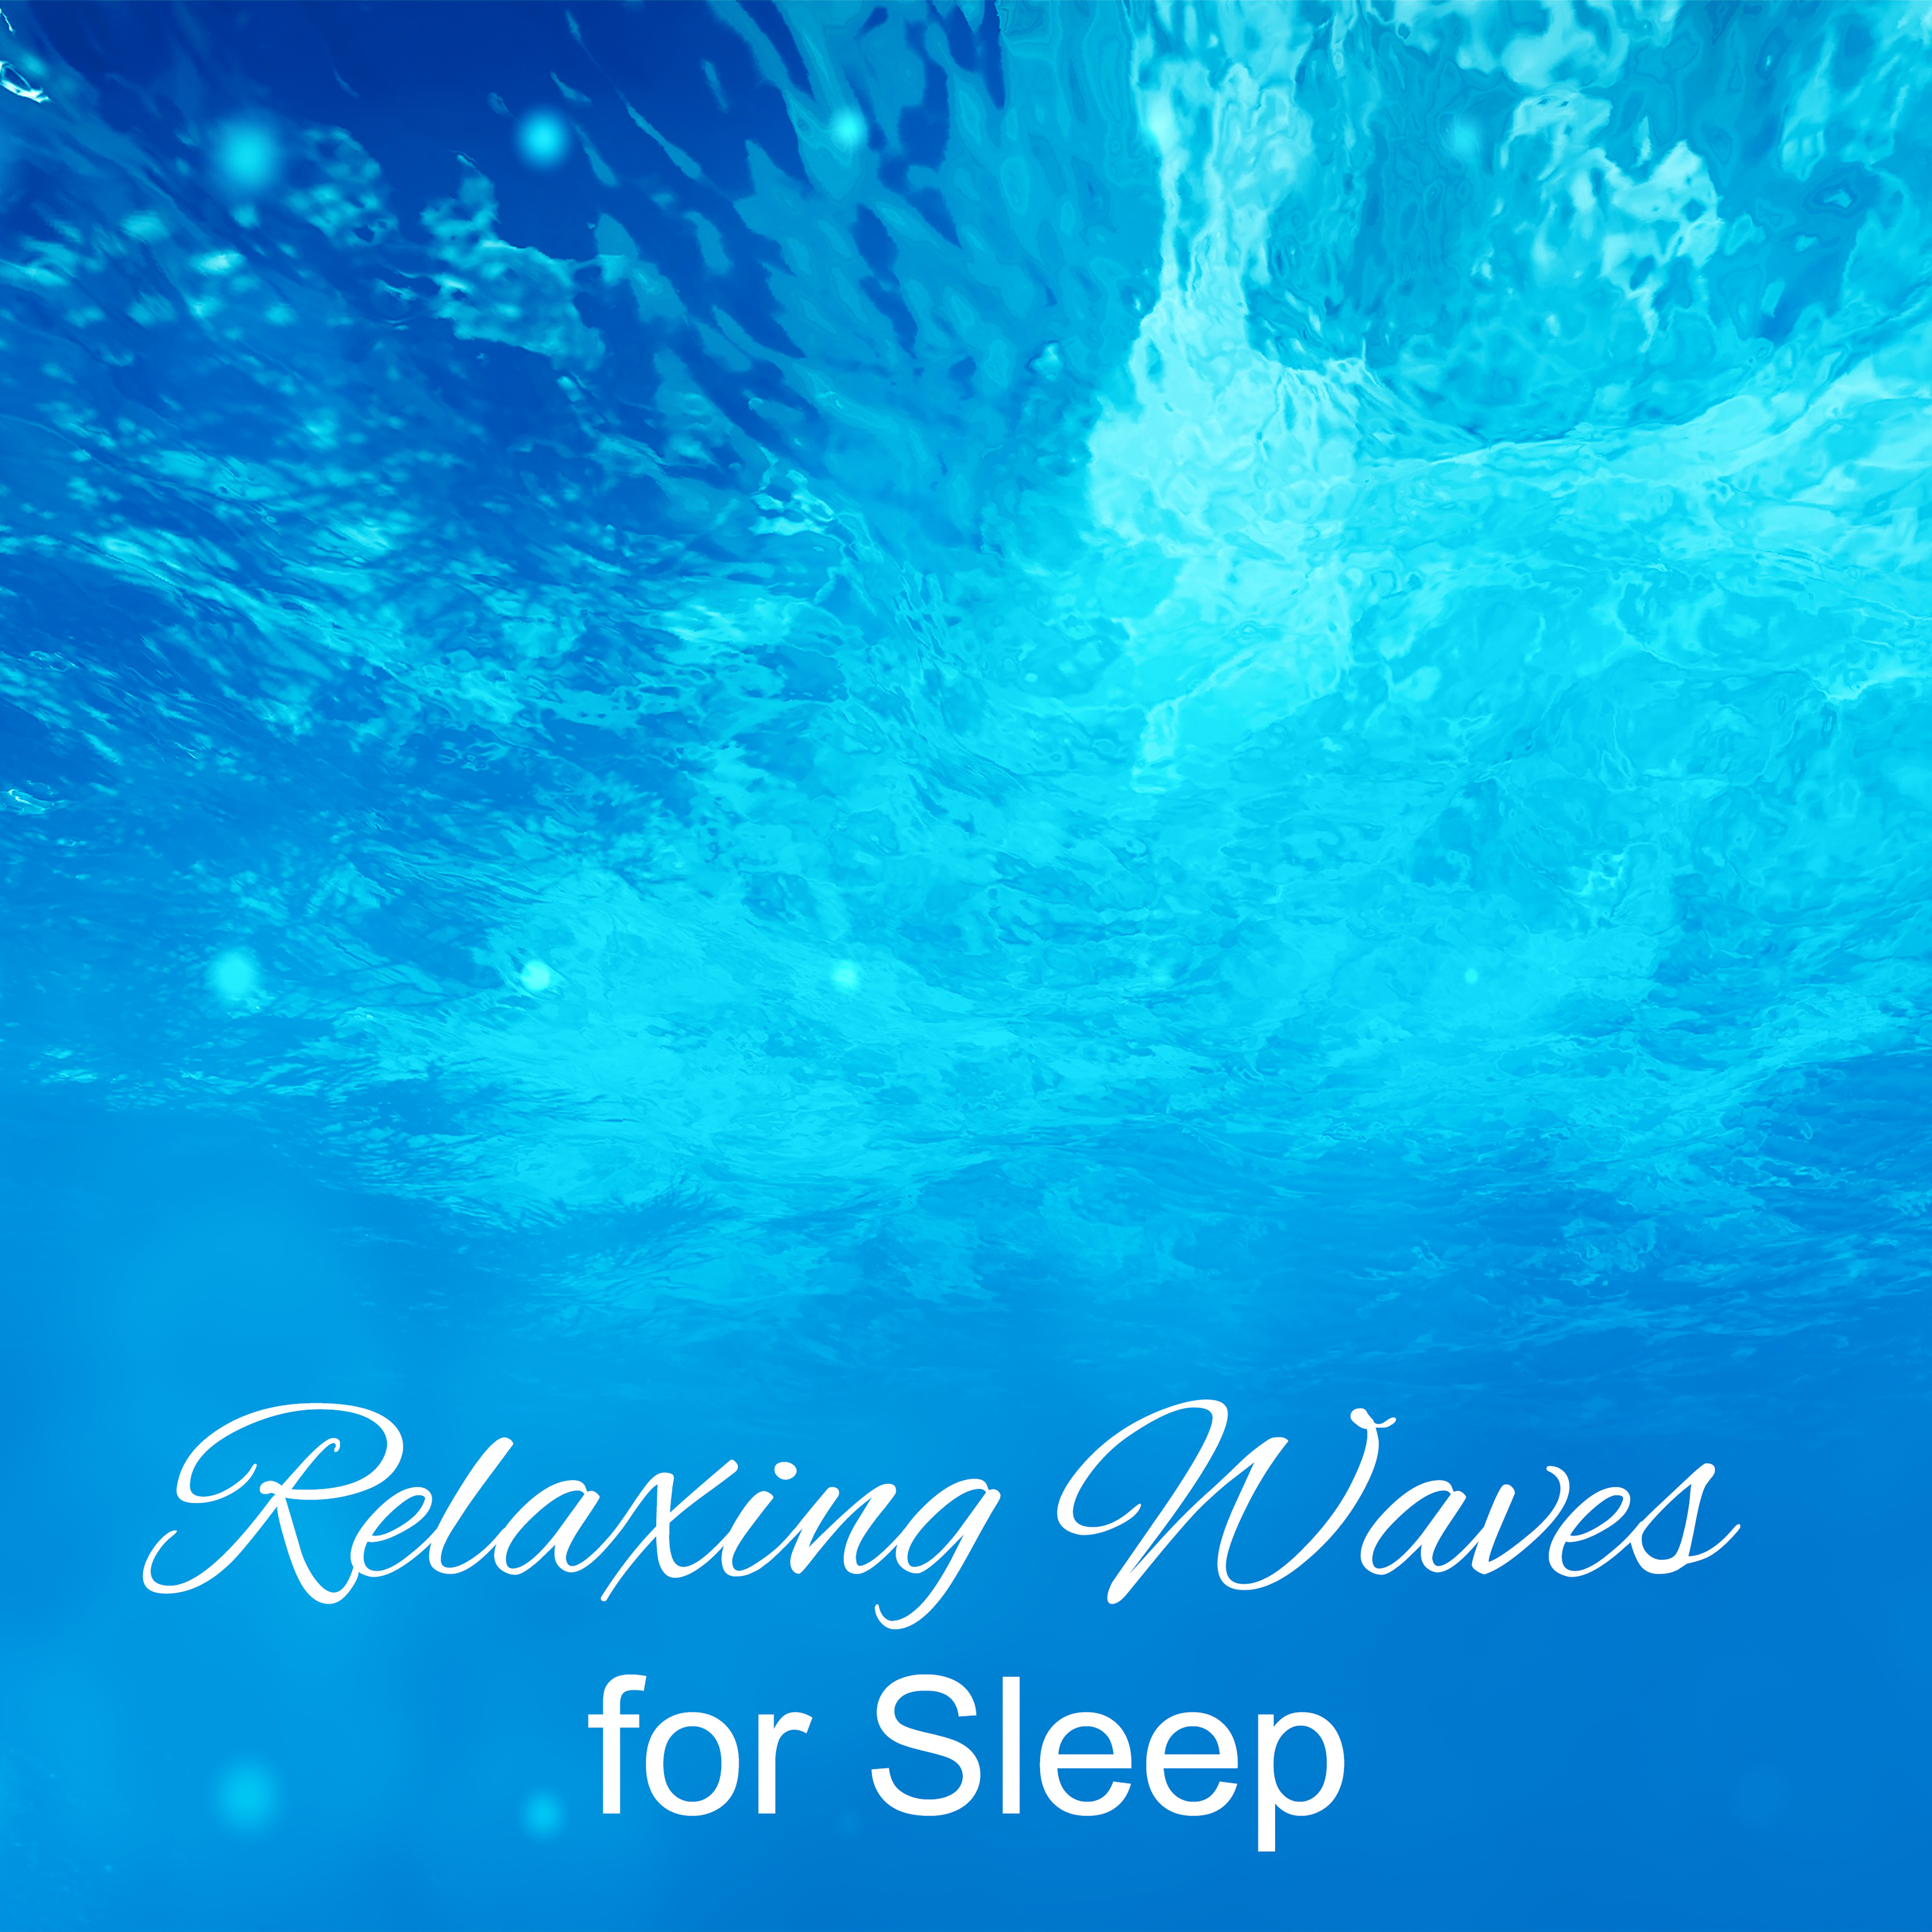 Relaxing Waves for Sleep  Peaceful Music, Deep Sleep, Tranquility  Harmony, Nature Sounds for Relaxation, Soothing Waves